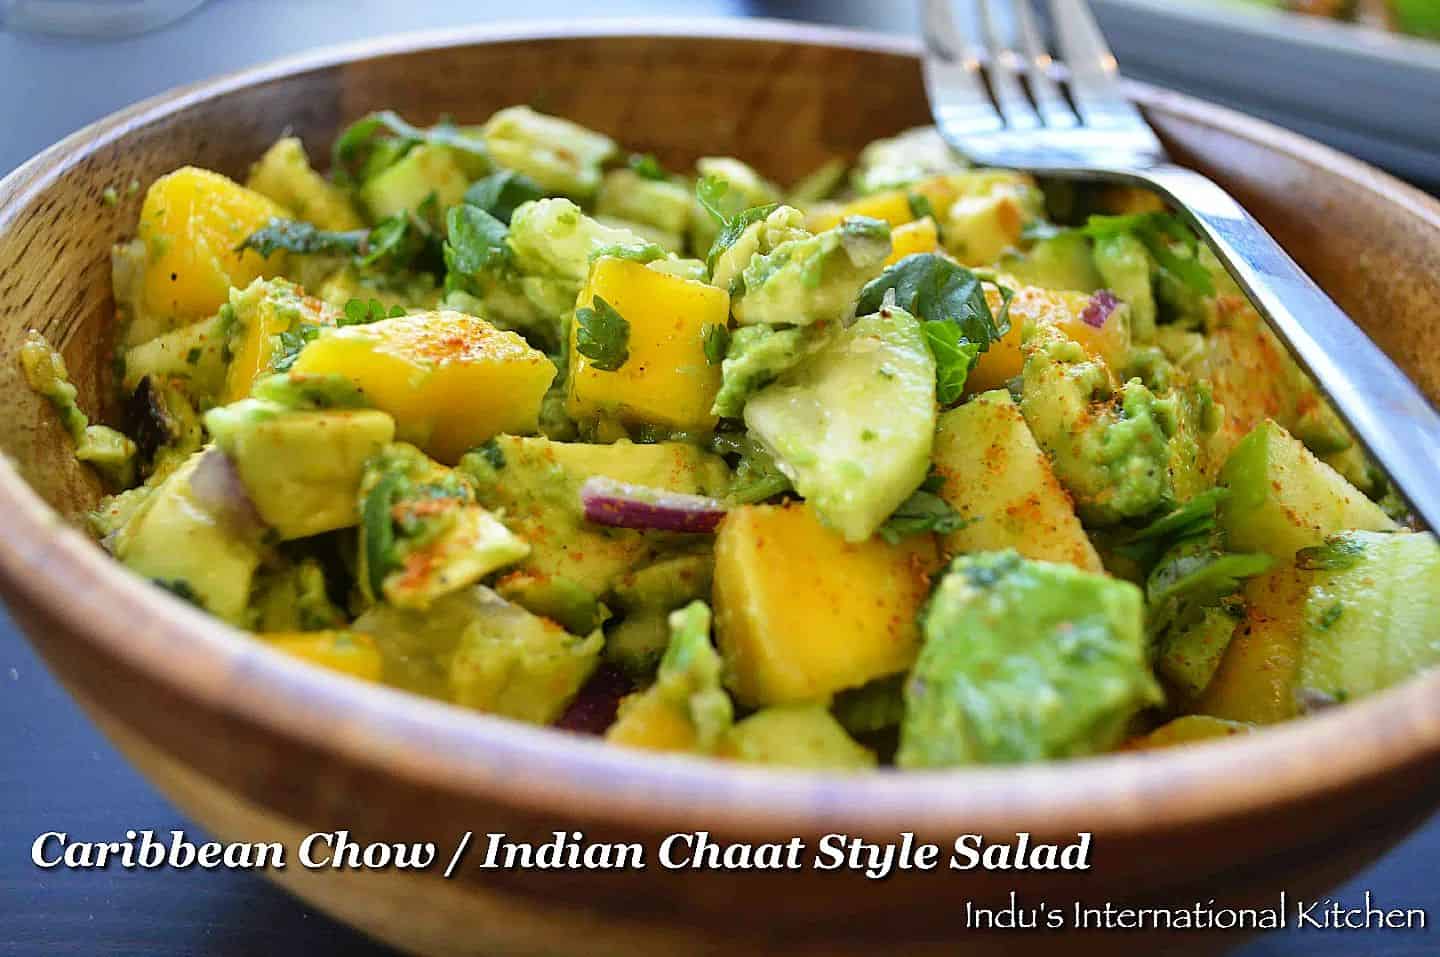 CARIBBEAN CHOW SALAD
A tangy and sweet tropical salad consisting of cucumber, avocados and mango deliciously spiced with cilantro, garlic, lemon juice and chaat masala. This recipe can be made completely AIP too! 

https://cook2nourish.com/2017/03/caribbean-chowindian-chaat-style-salad.html

#autoimmunedisease #aip #autoimmuneprotocol #cook2nourish #dairyfree #aiprecipes #aipdiet #rheumatoidarthritis 
#glutenfree #nutfree #immunebooster #AIPfollow #autoimmuneawareness #dietistanutricionista #fitlife #recipe
 #caribbean #chow #salad #indian #chaatrecipe #saladrecipe #chowrecipe #caribbeansalad